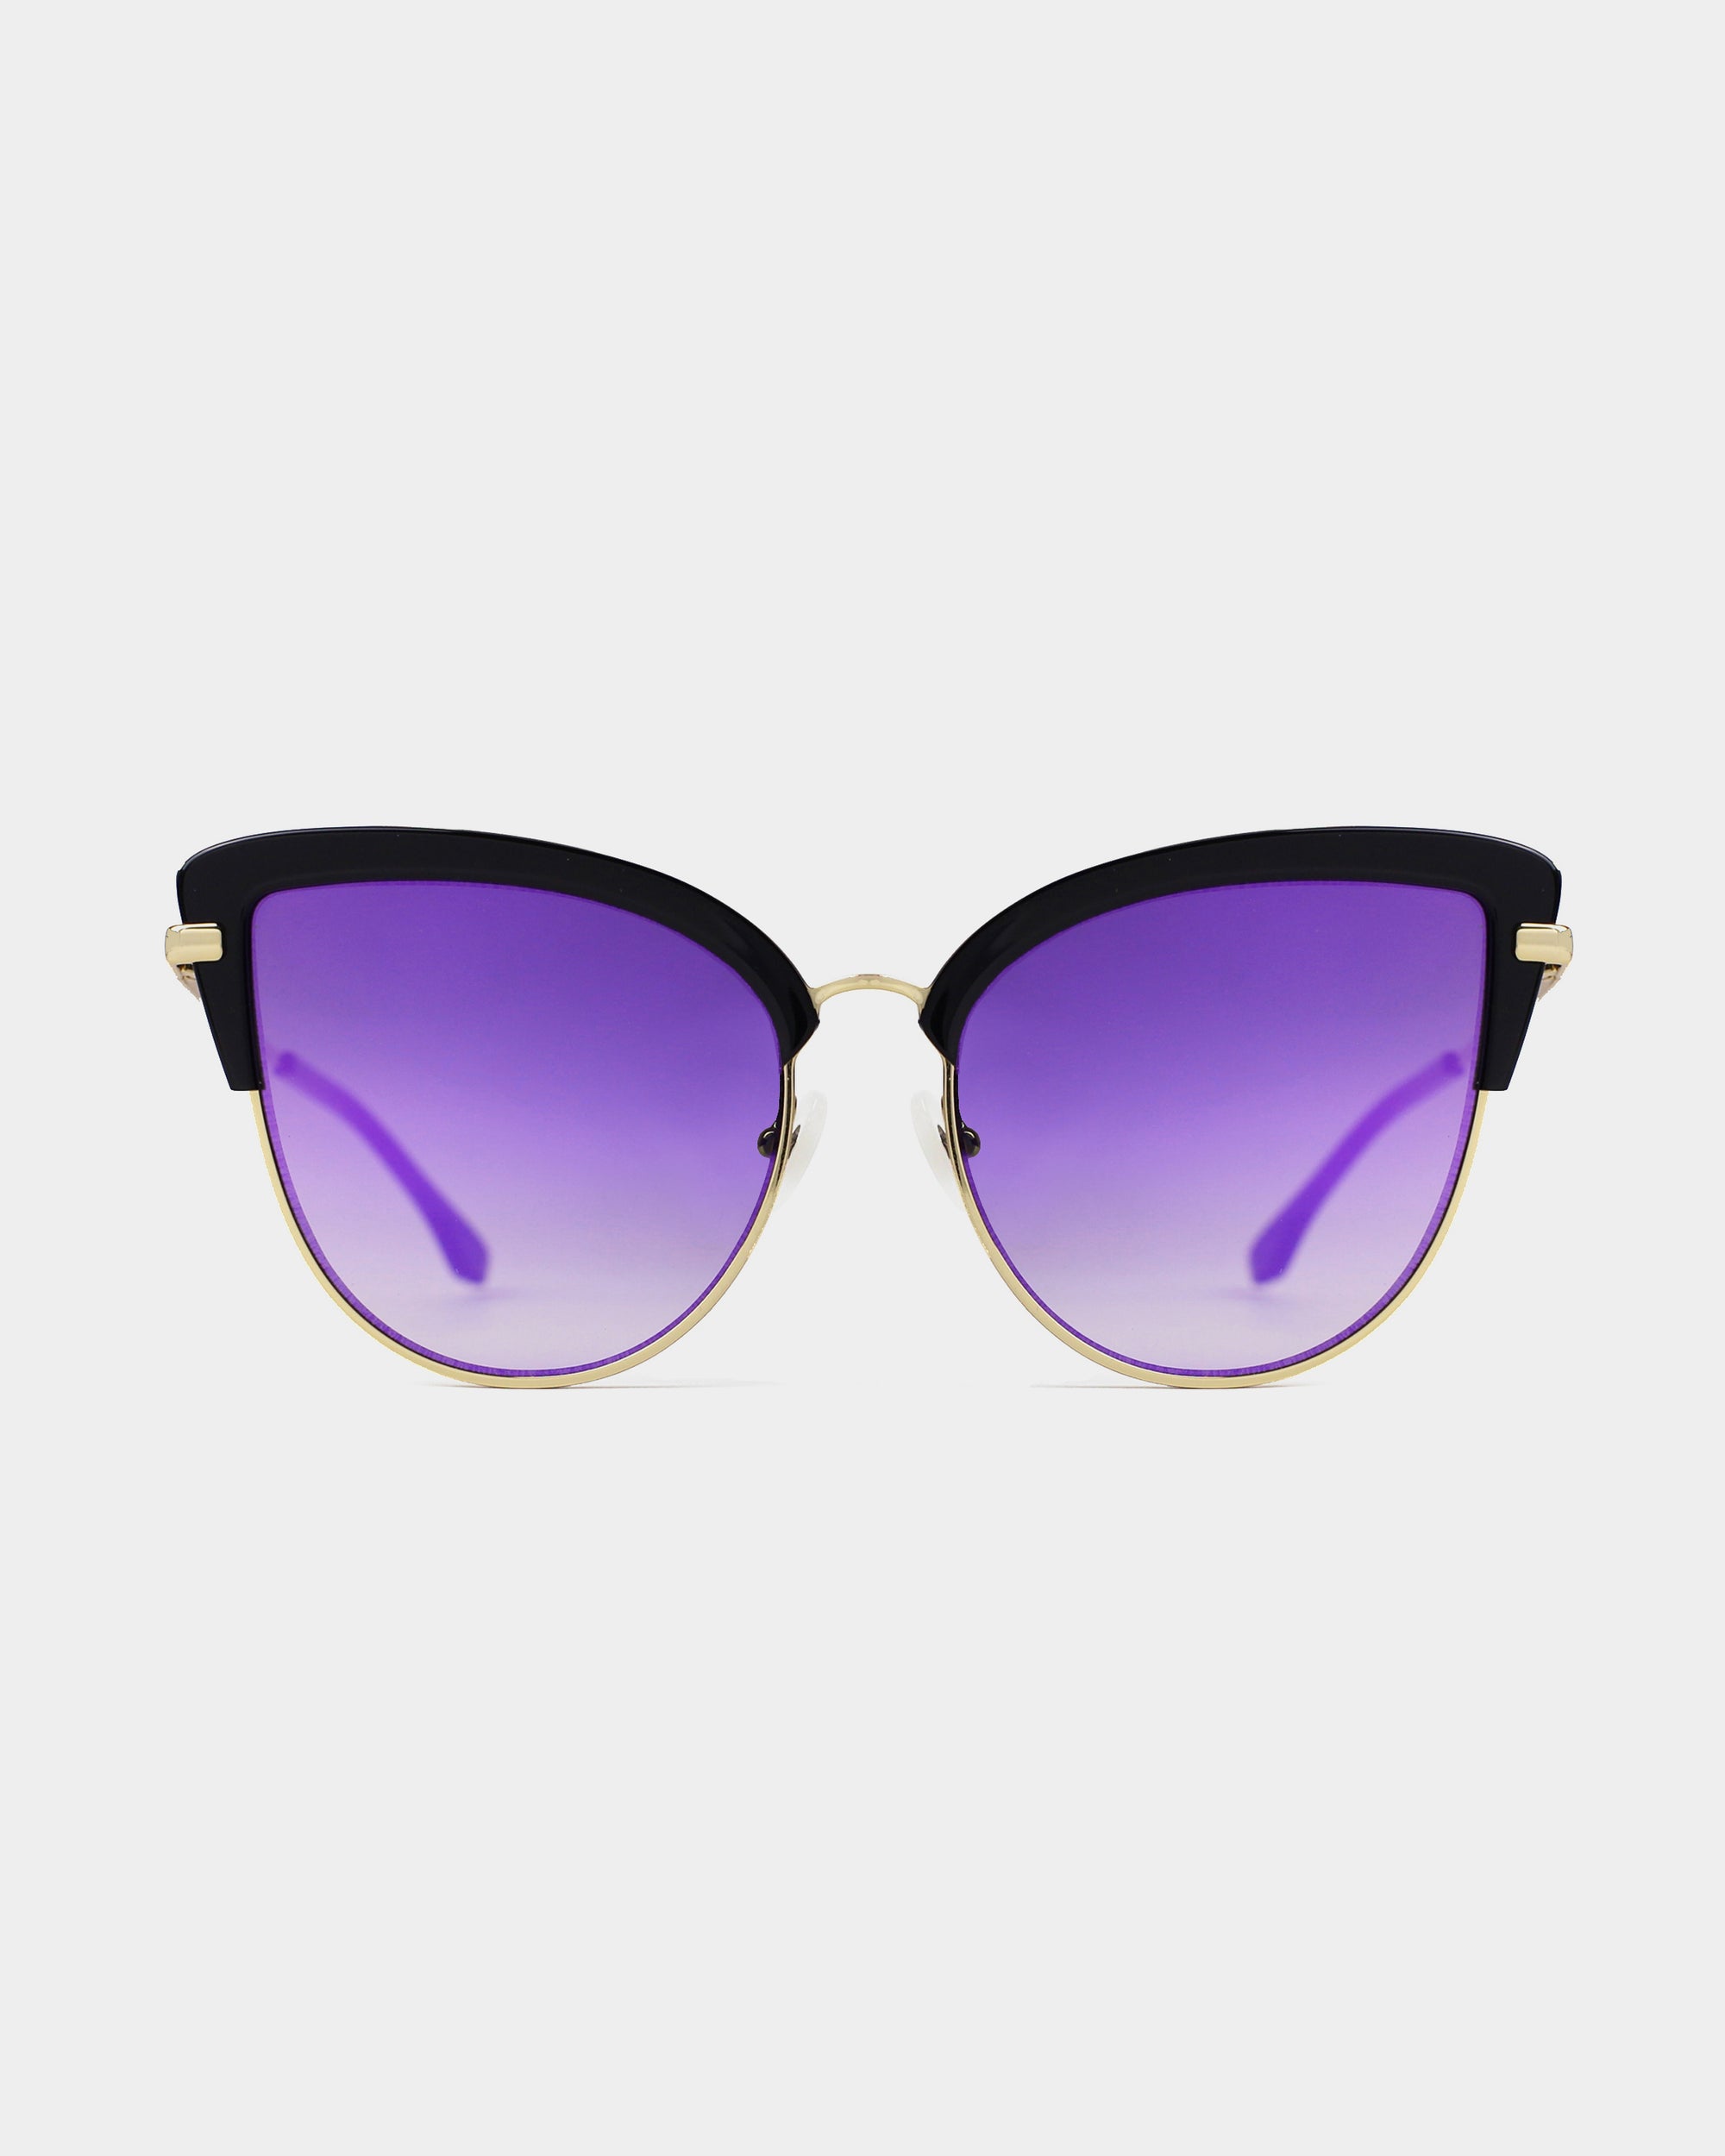 A pair of stylish cat-eye sunglasses featuring nylon gradient purple lenses, black upper rims, and 18-karat gold plating on the nose bridge and temples. The background is plain white, emphasizing the sleek and elegant design of Venus by For Art&#39;s Sake®.